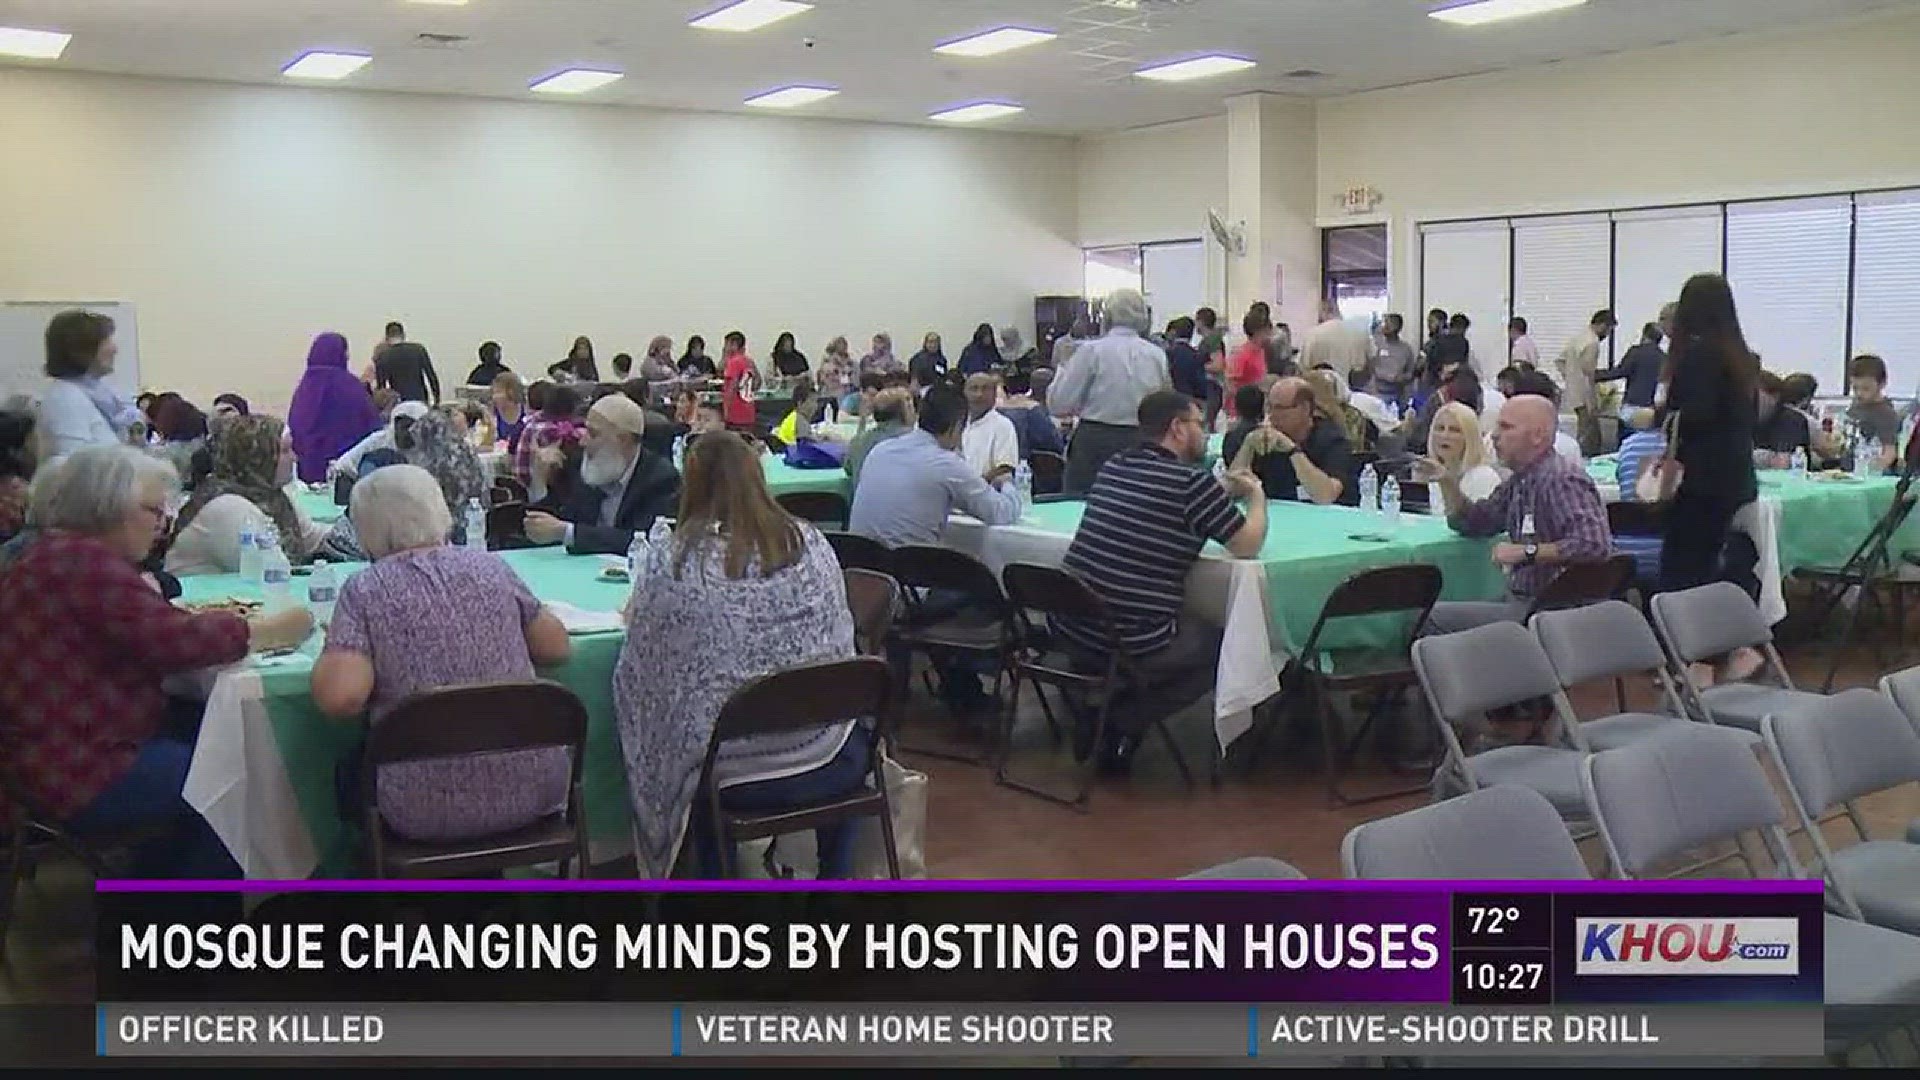 The Bear Creek Islamic Center invited its neighbors to an Open Mosque Day on Saturday.